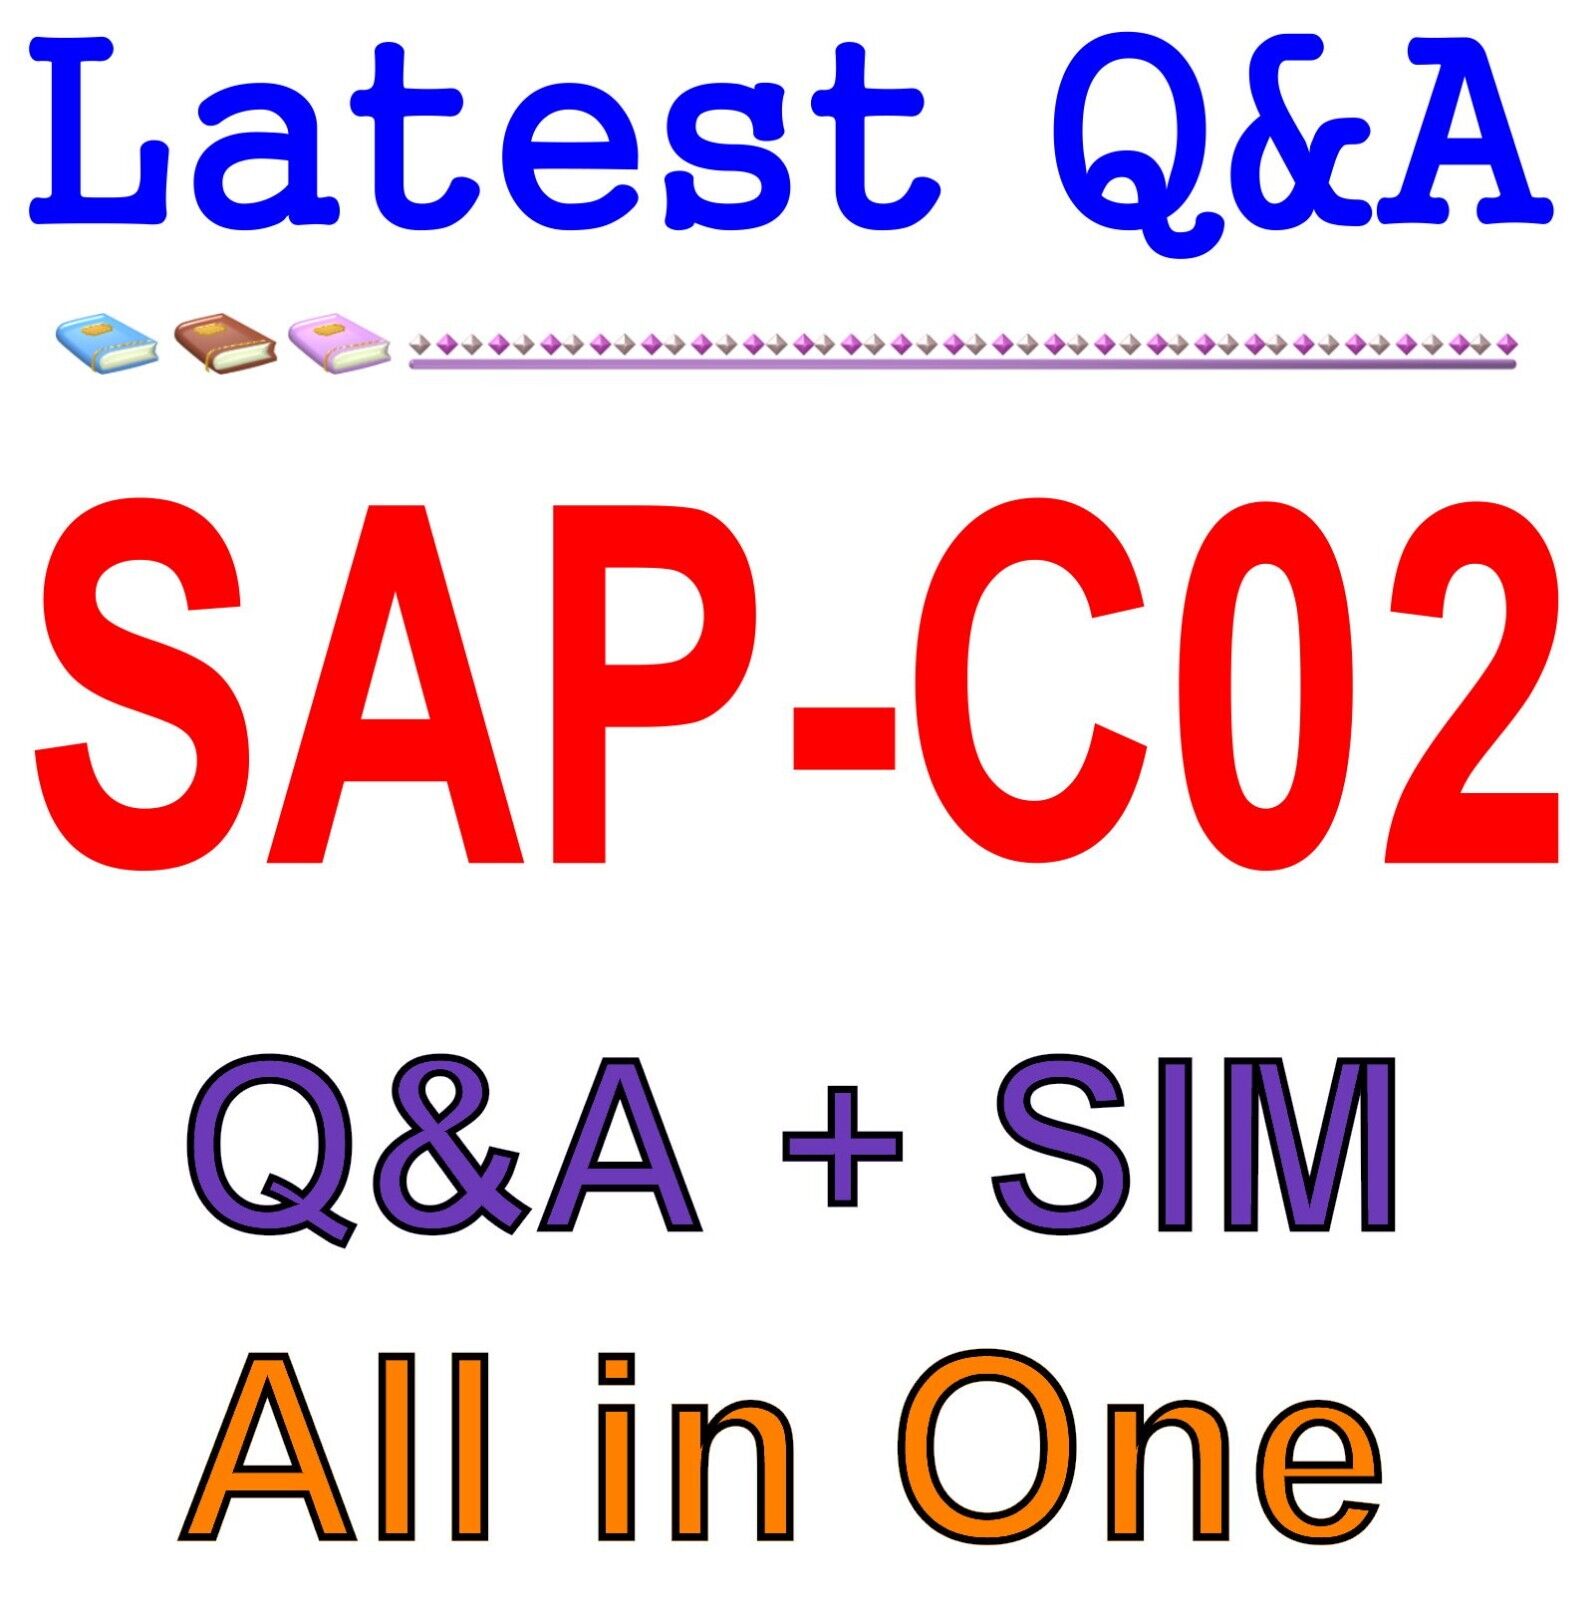 Amazon AWS Certified Solutions Architect - Professional SAP-C02 Exam Q&A